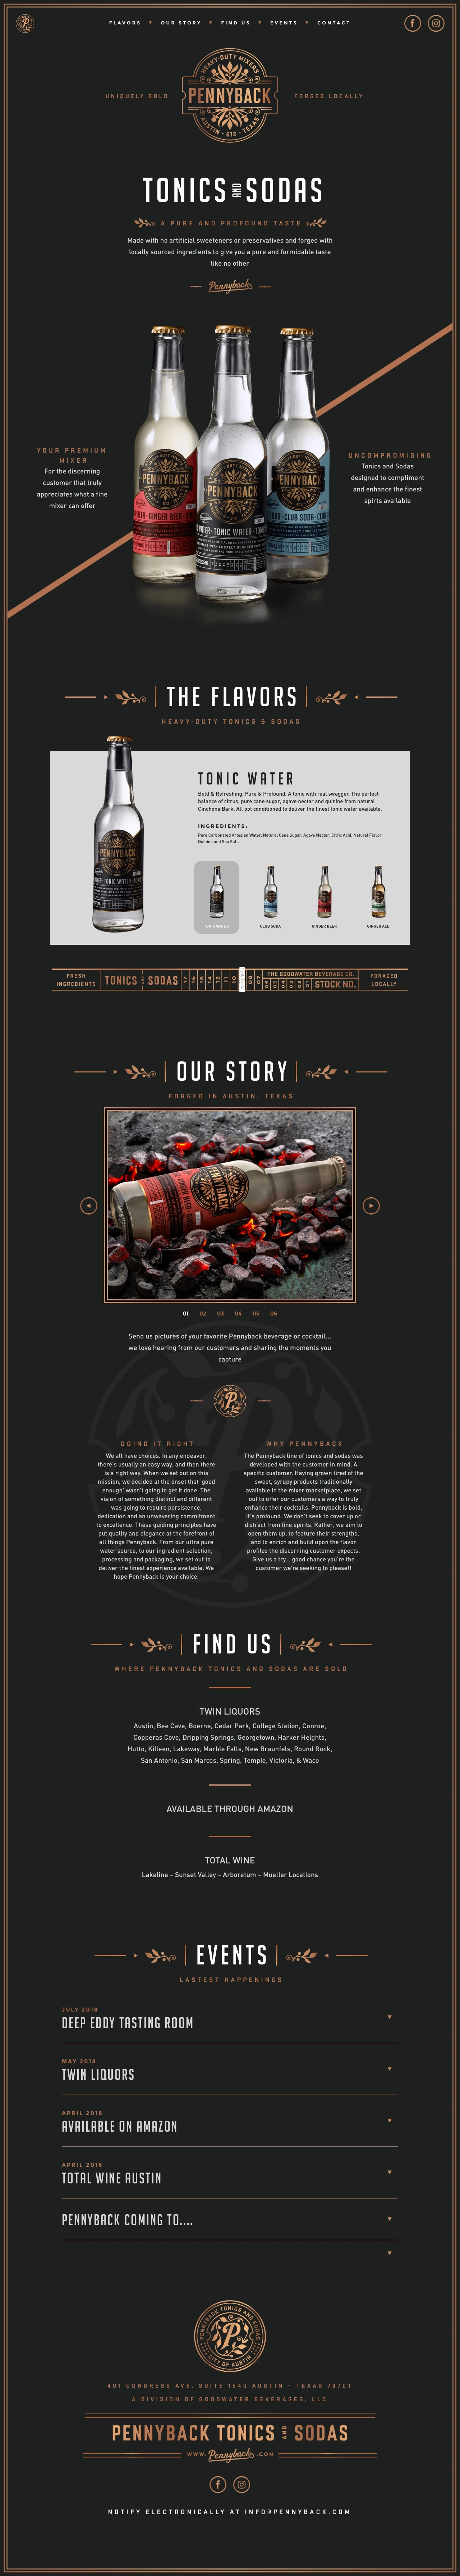 Pennyback Tonic and Sodas Landing Page Example: Made with no artificial sweetners or preservatives and forged with locally sourced ingredients to give you a pure and formidable taste like no other.